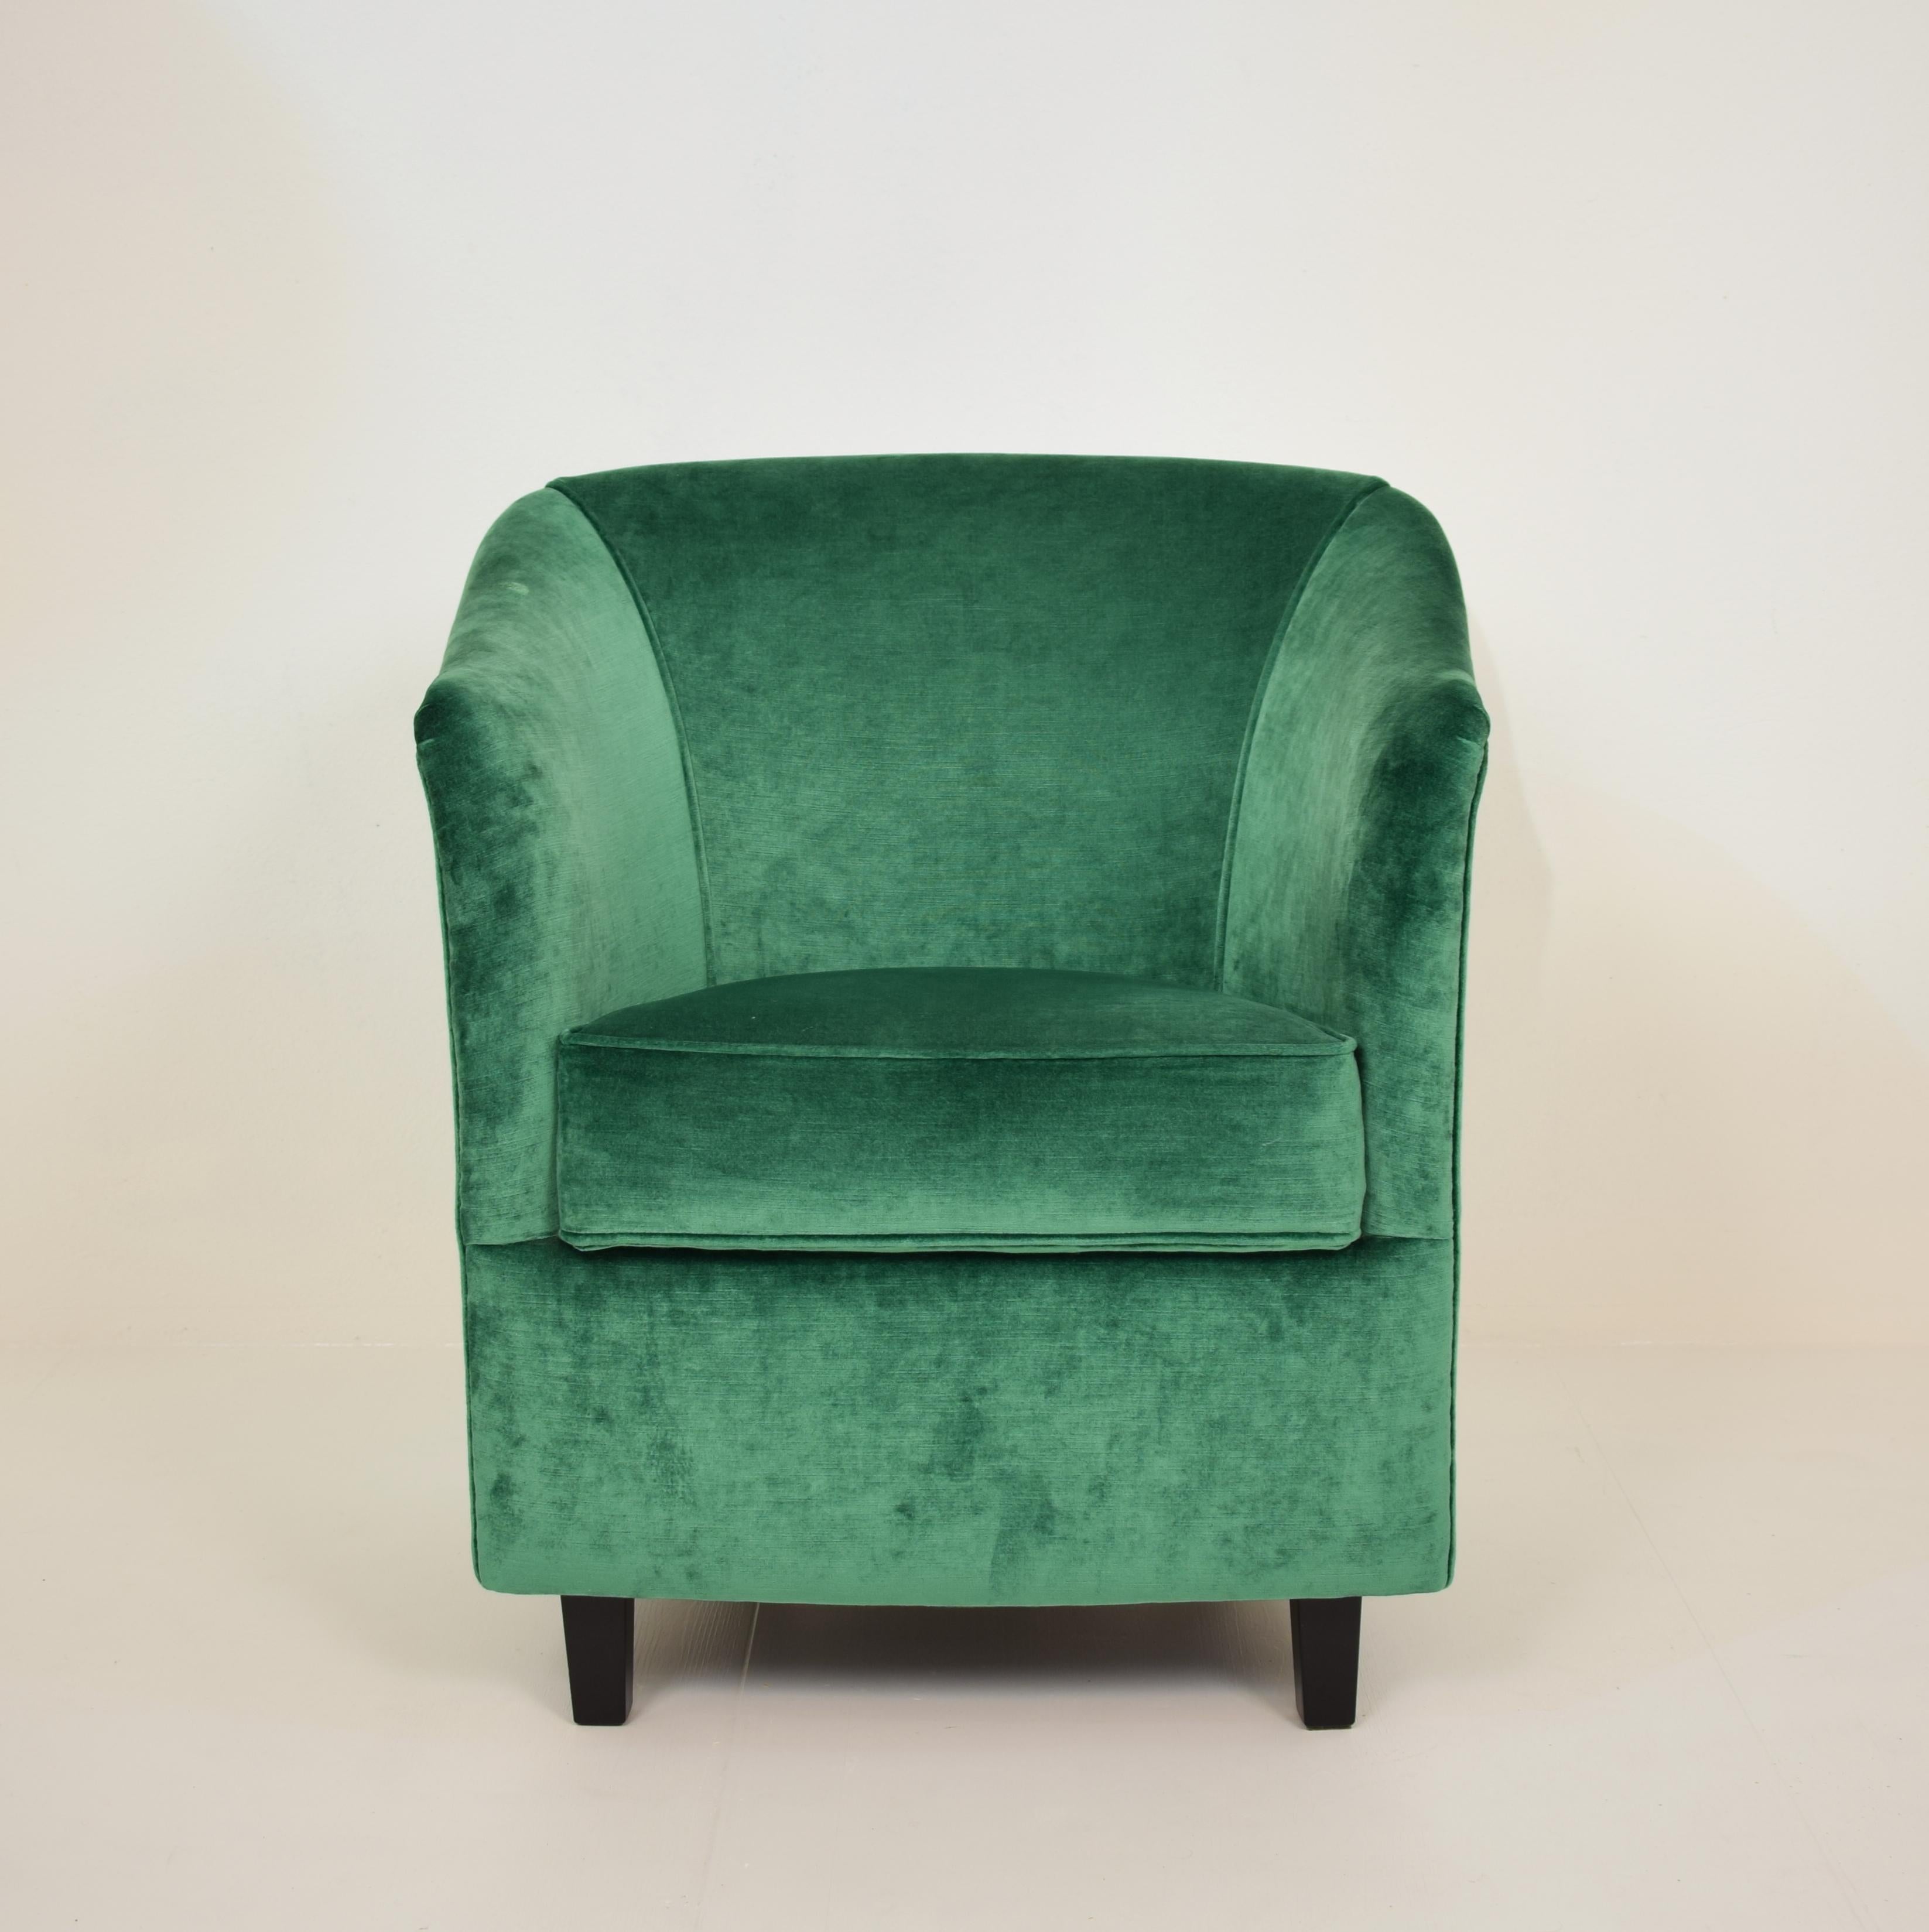 This elegant midcentury French small club chair / armchair from circa 1980 is re-upholstered in green velvet.
A unique piece which is a great eyecatcher for your antique, modern, Space Age or midcentury interior.
All pieces are looked after in our